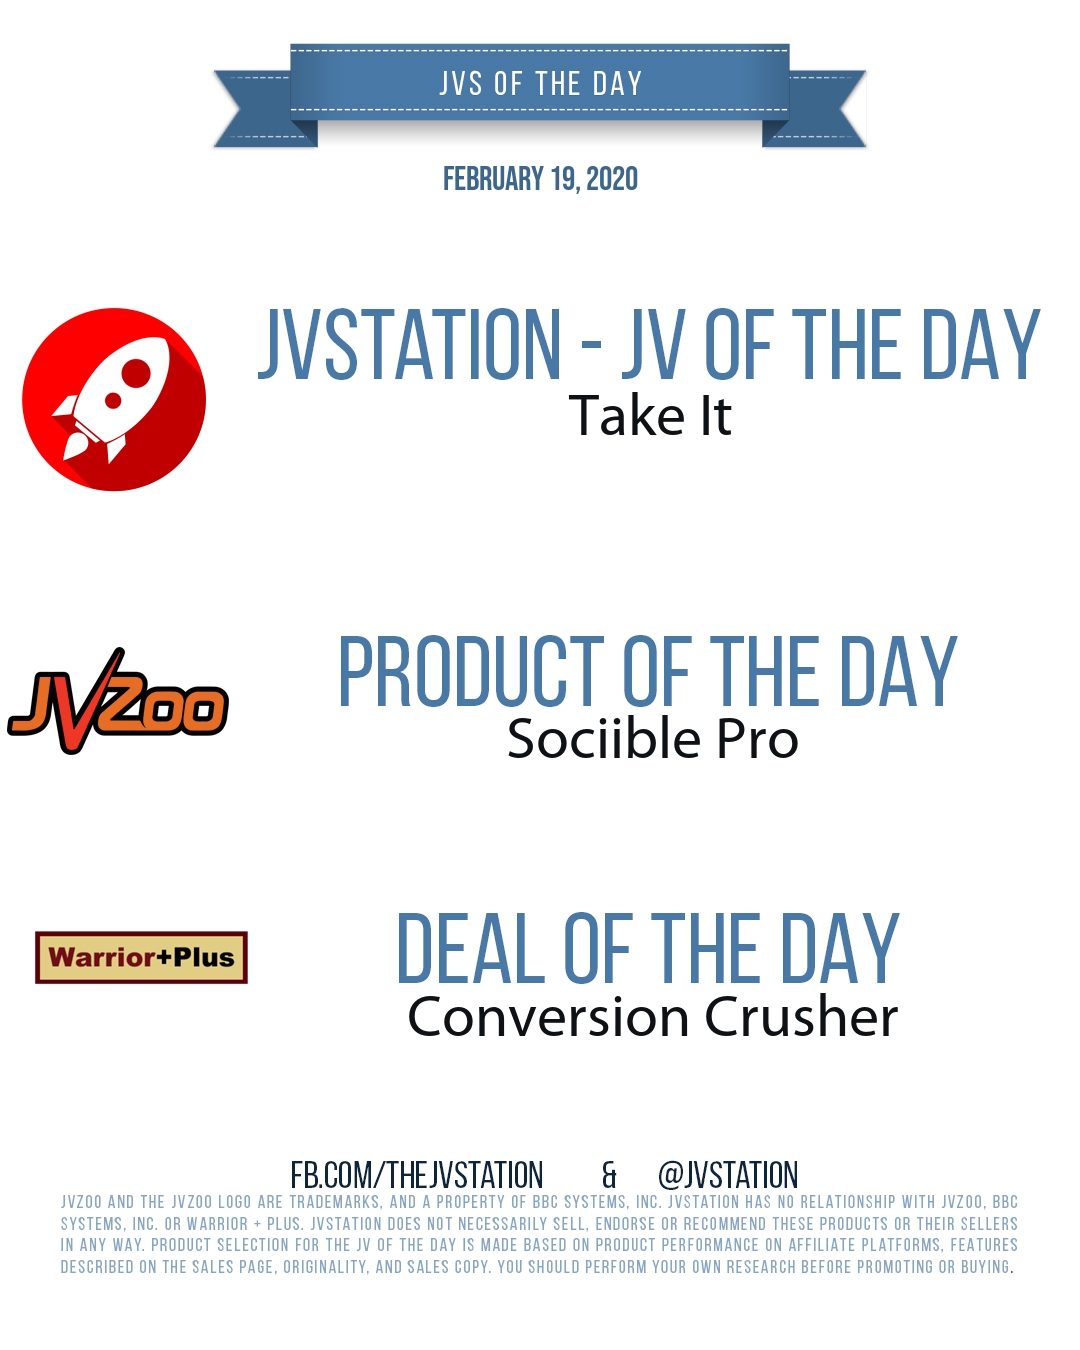 JVs of the day - February 19, 2020